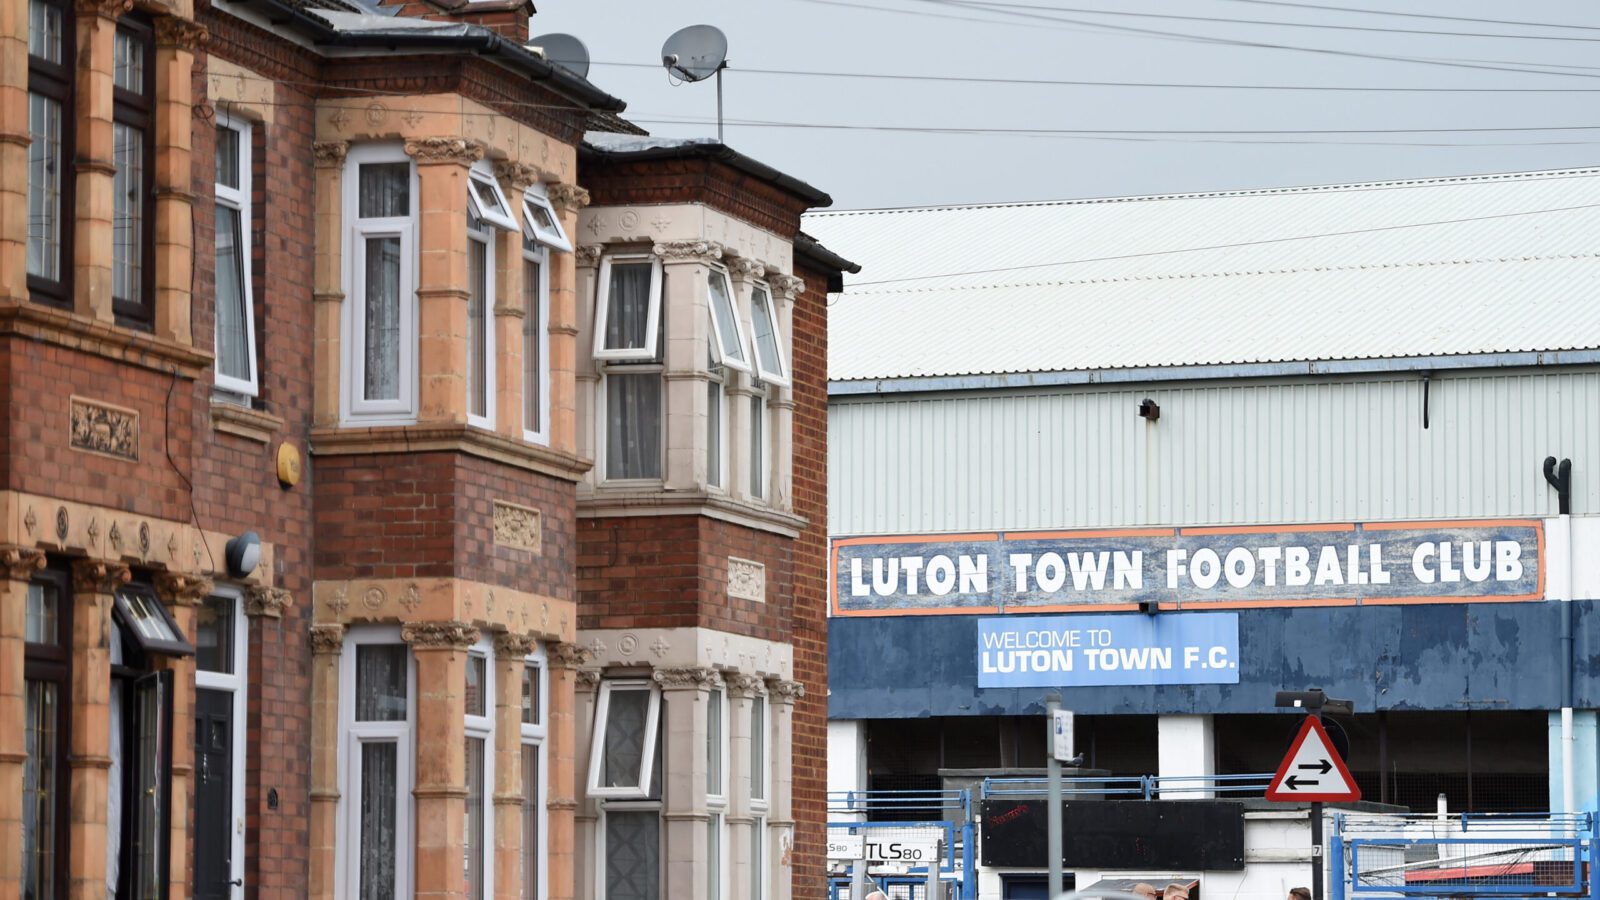 Luton vs Chelsea Prediction: Free-scoring Blues should see off Hatters